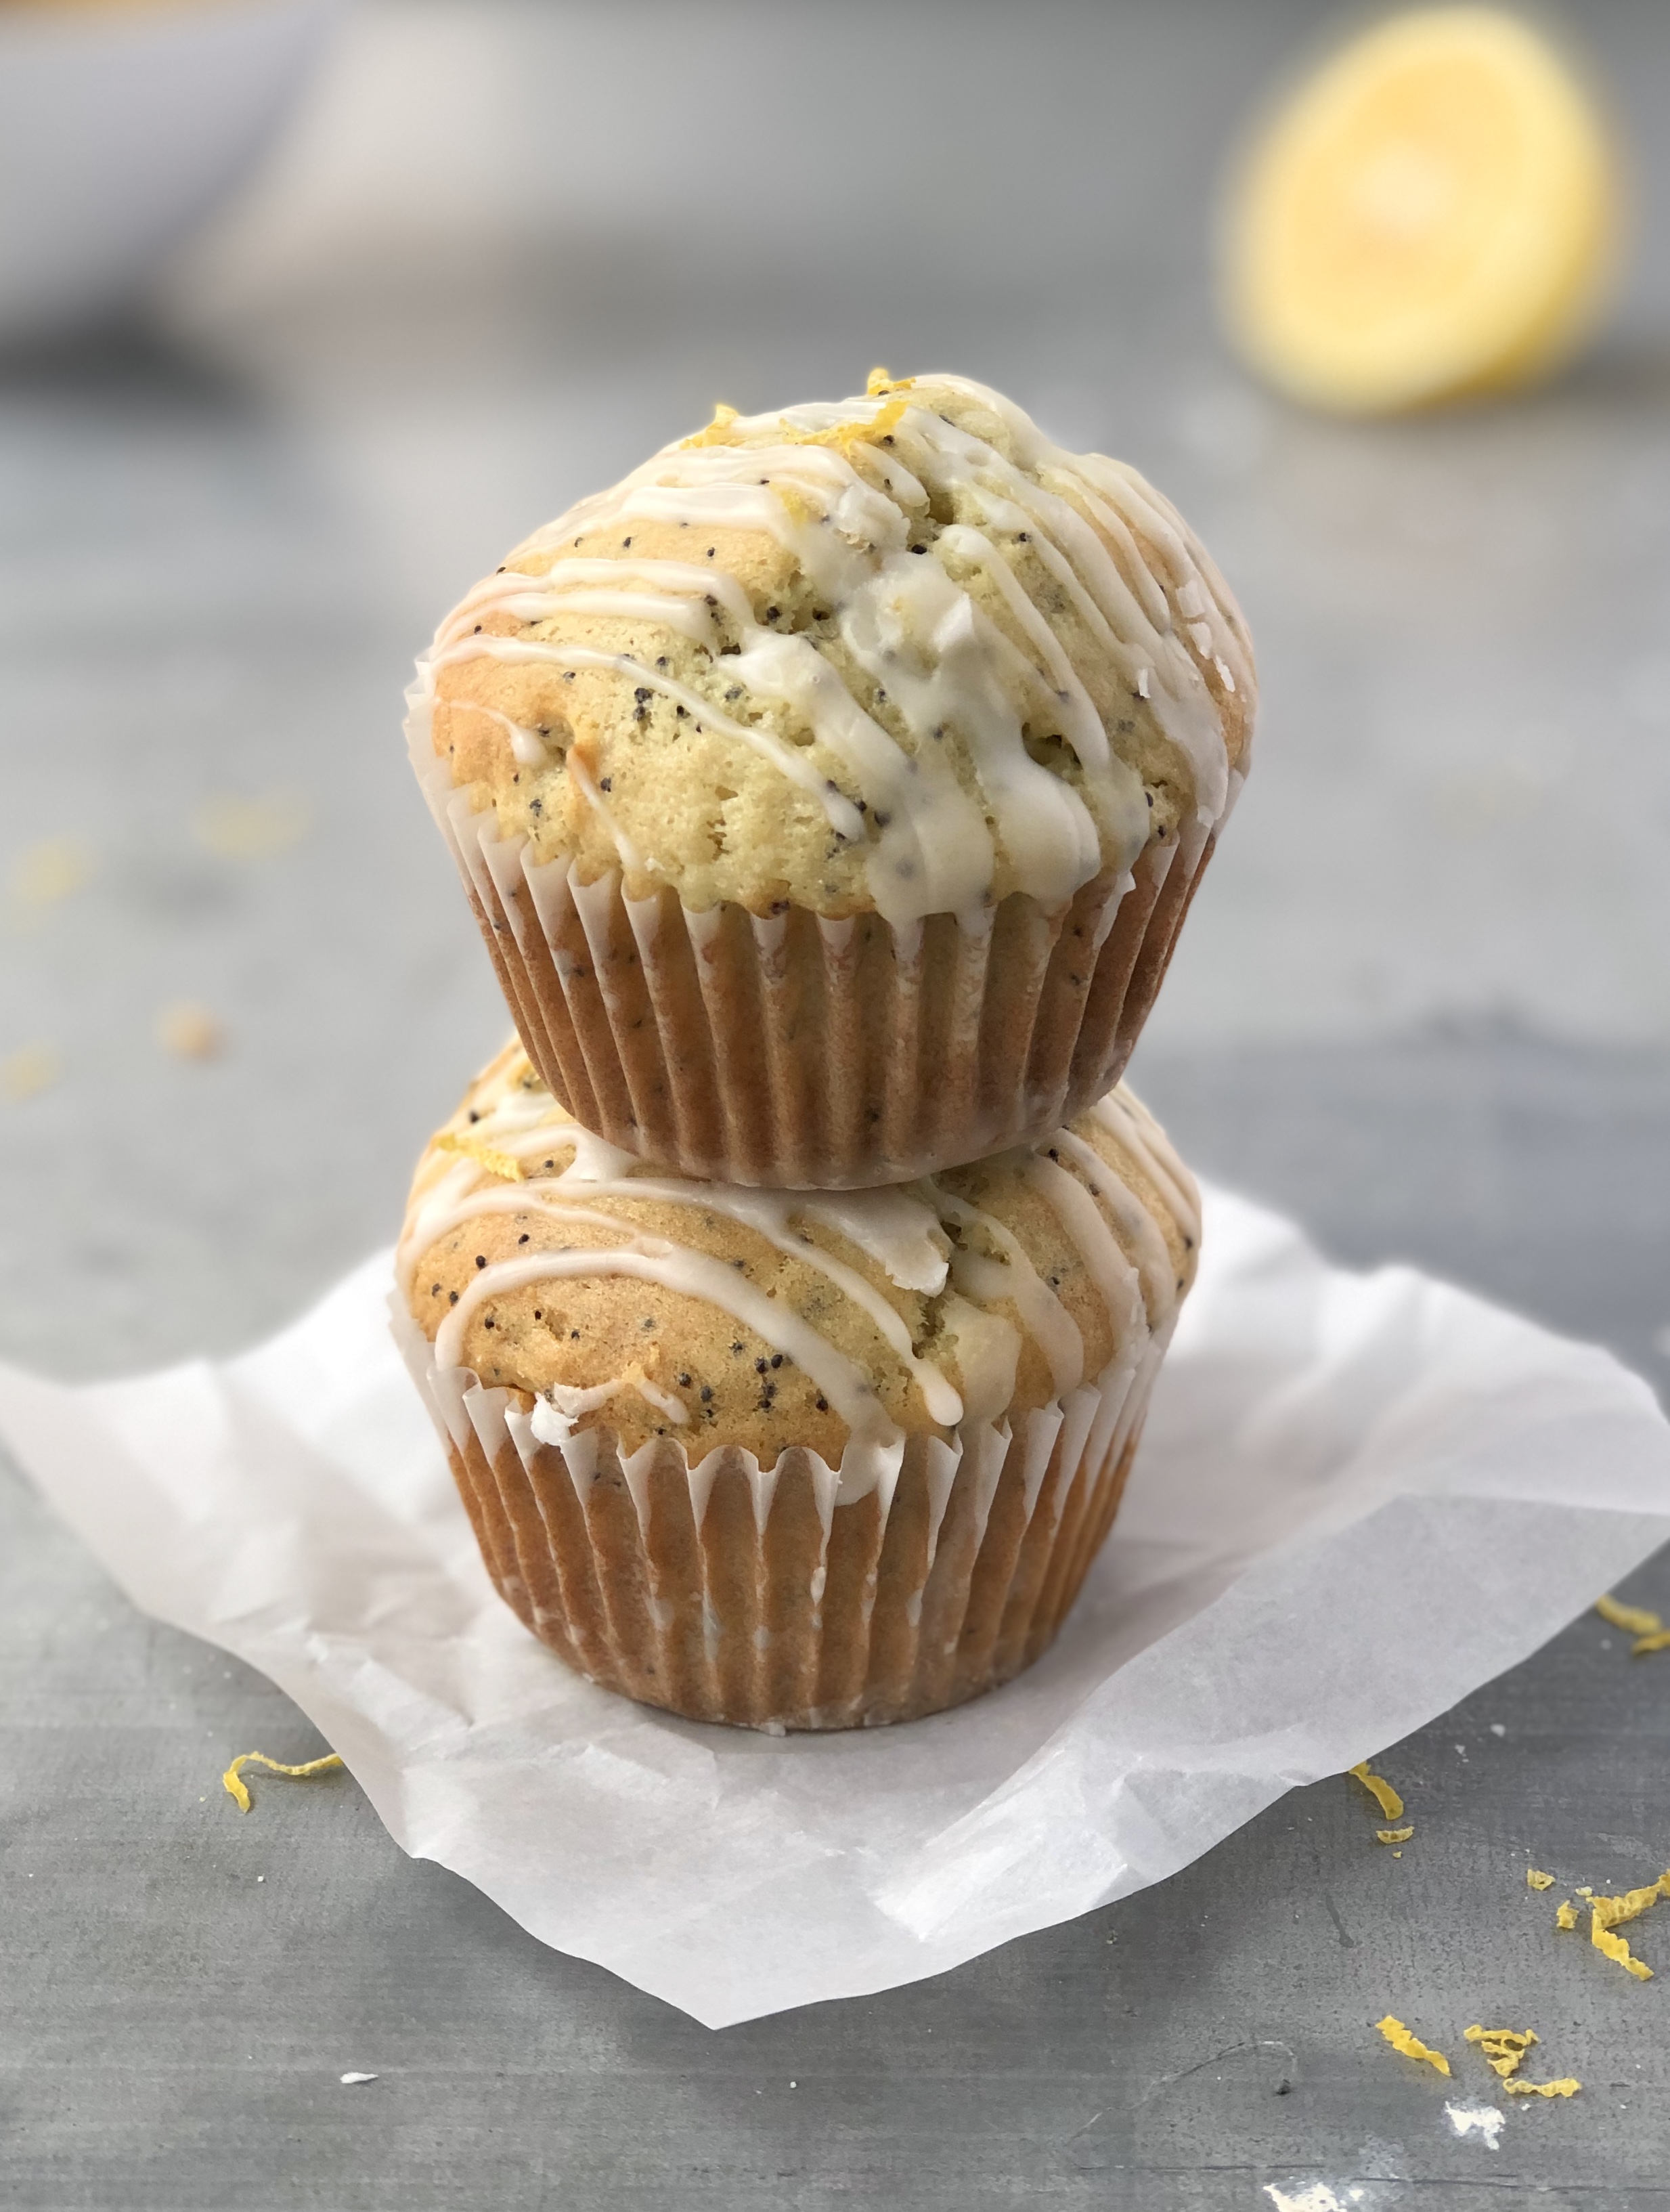 Lemon Poppy Seed Muffins 7 BEST Two Muffins Stacked - The Kitchen Fairy